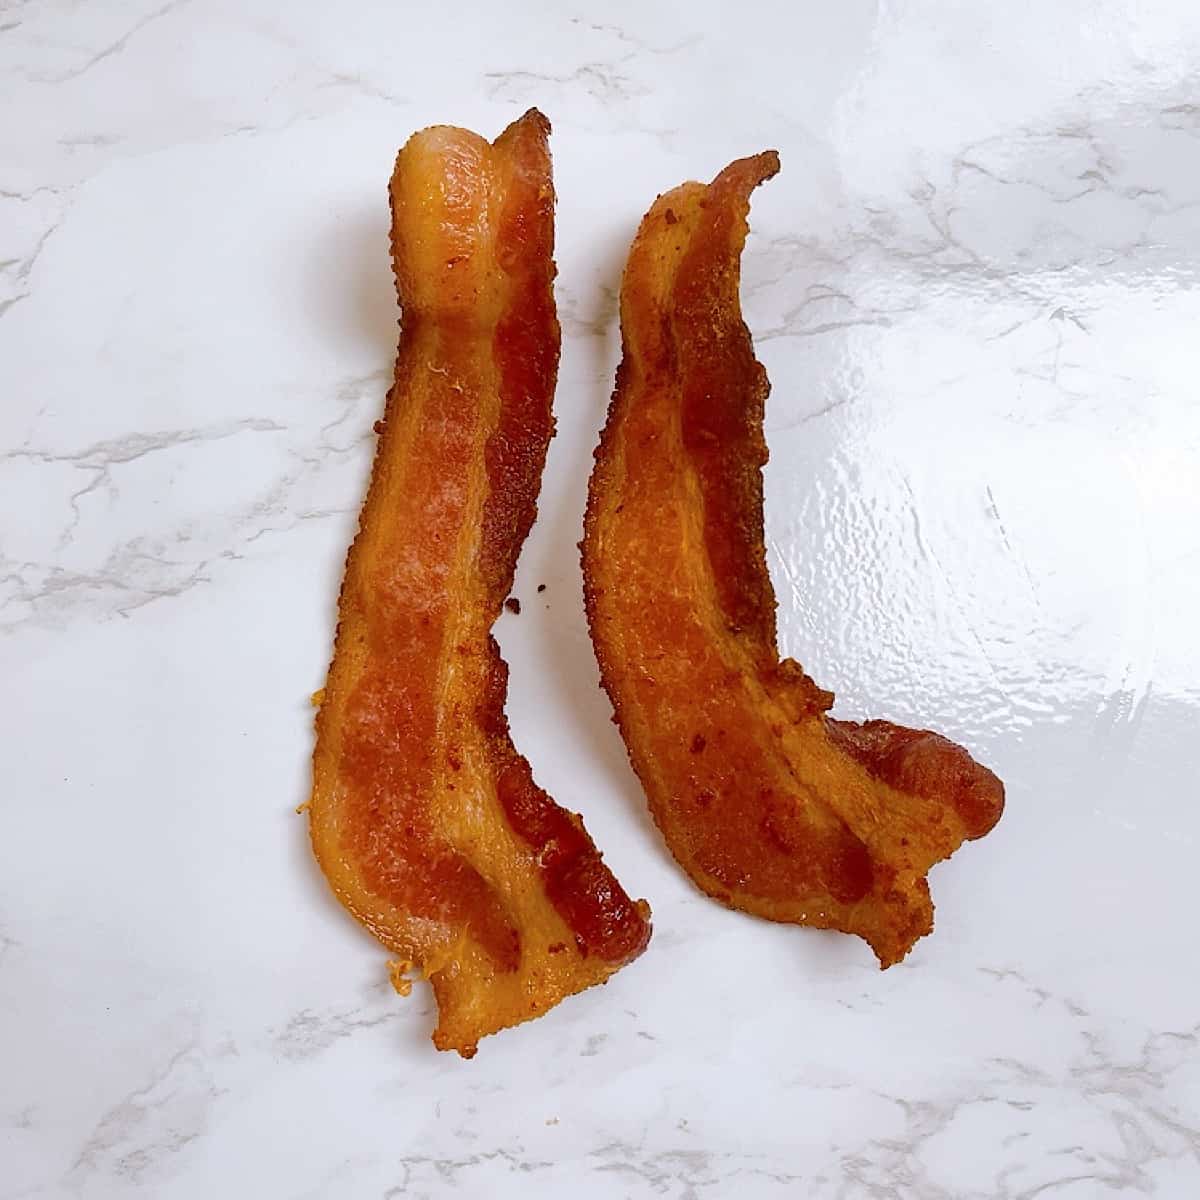 Two pieces of fried bacon